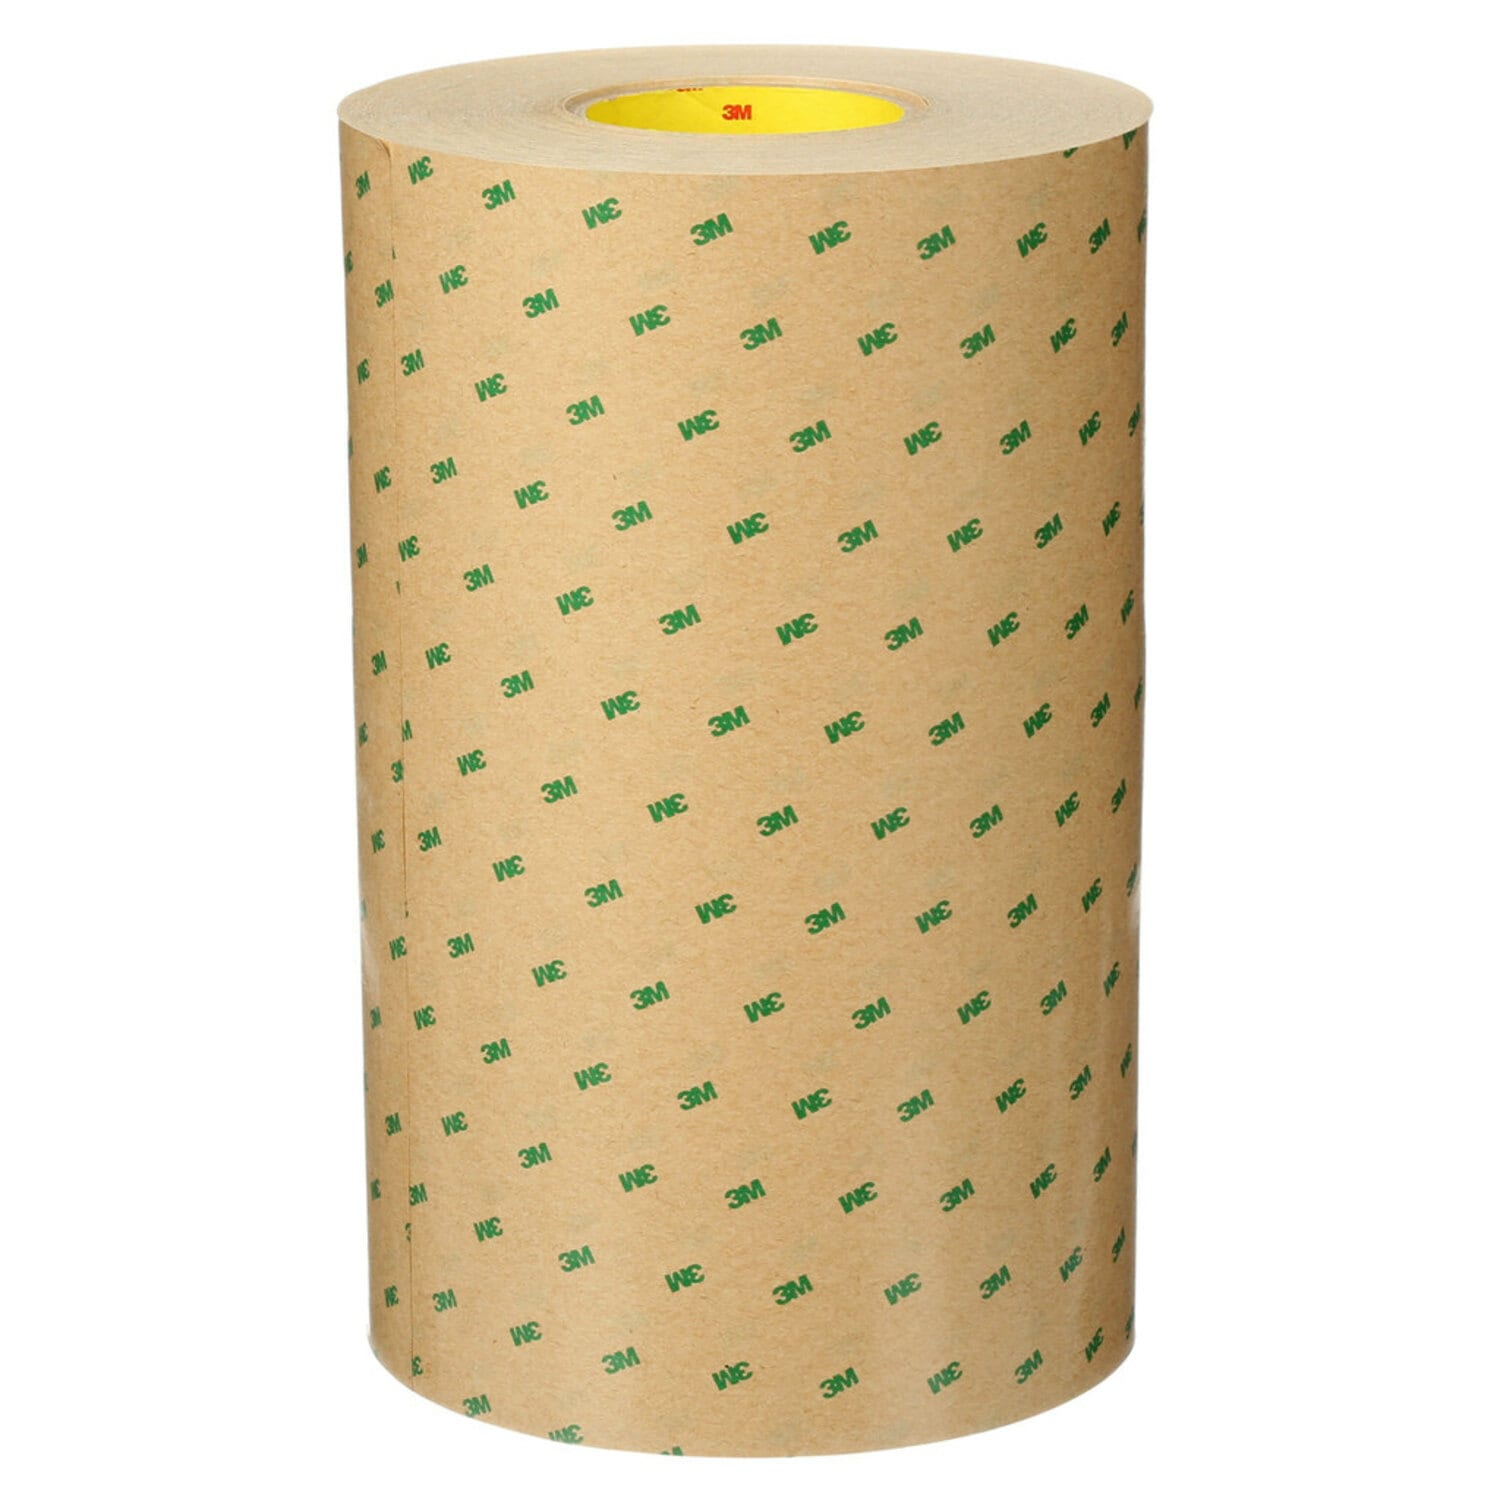 7000123472 - 3M Adhesive Transfer Tape 9471, Clear, 48 in x 180 yd, 2 mil, 1 roll
per case